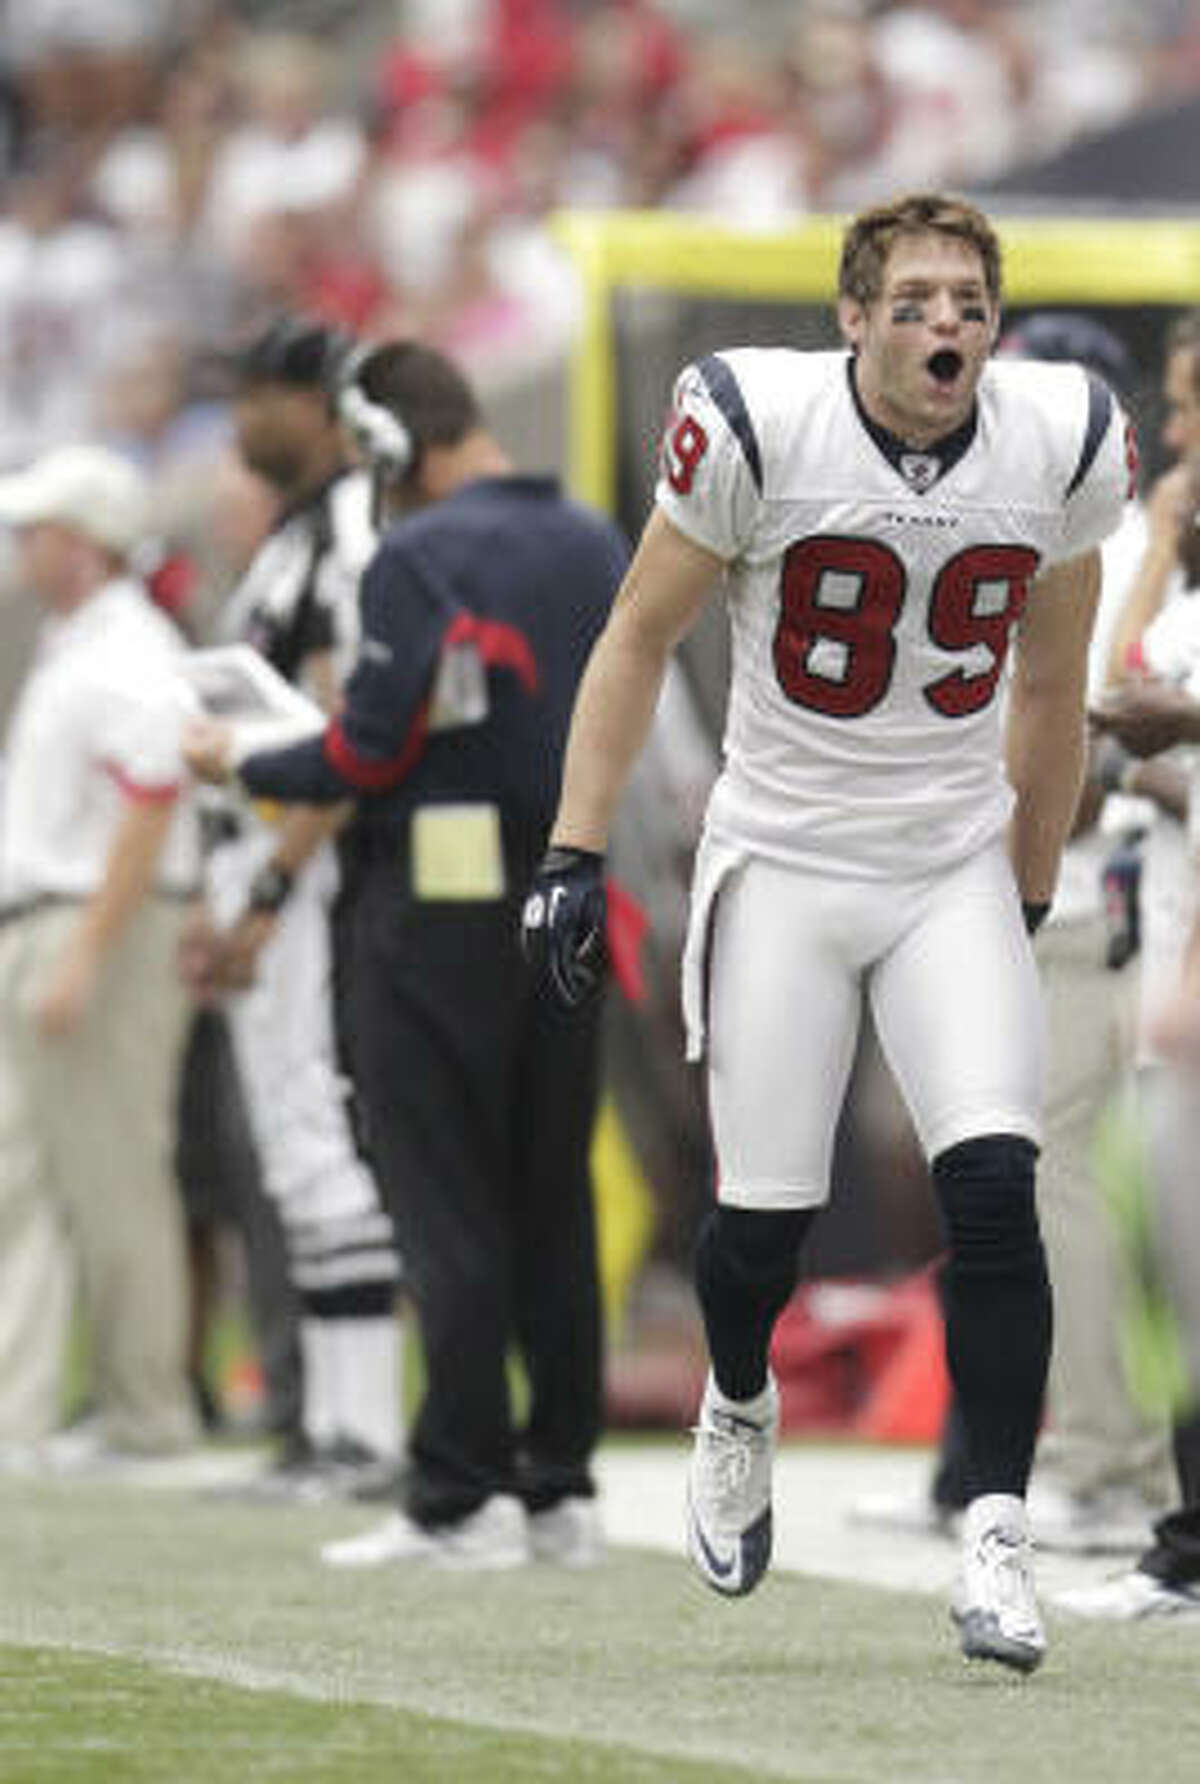 Texans receiver David Anderson celebrates after a touchdown by Arian Foster.